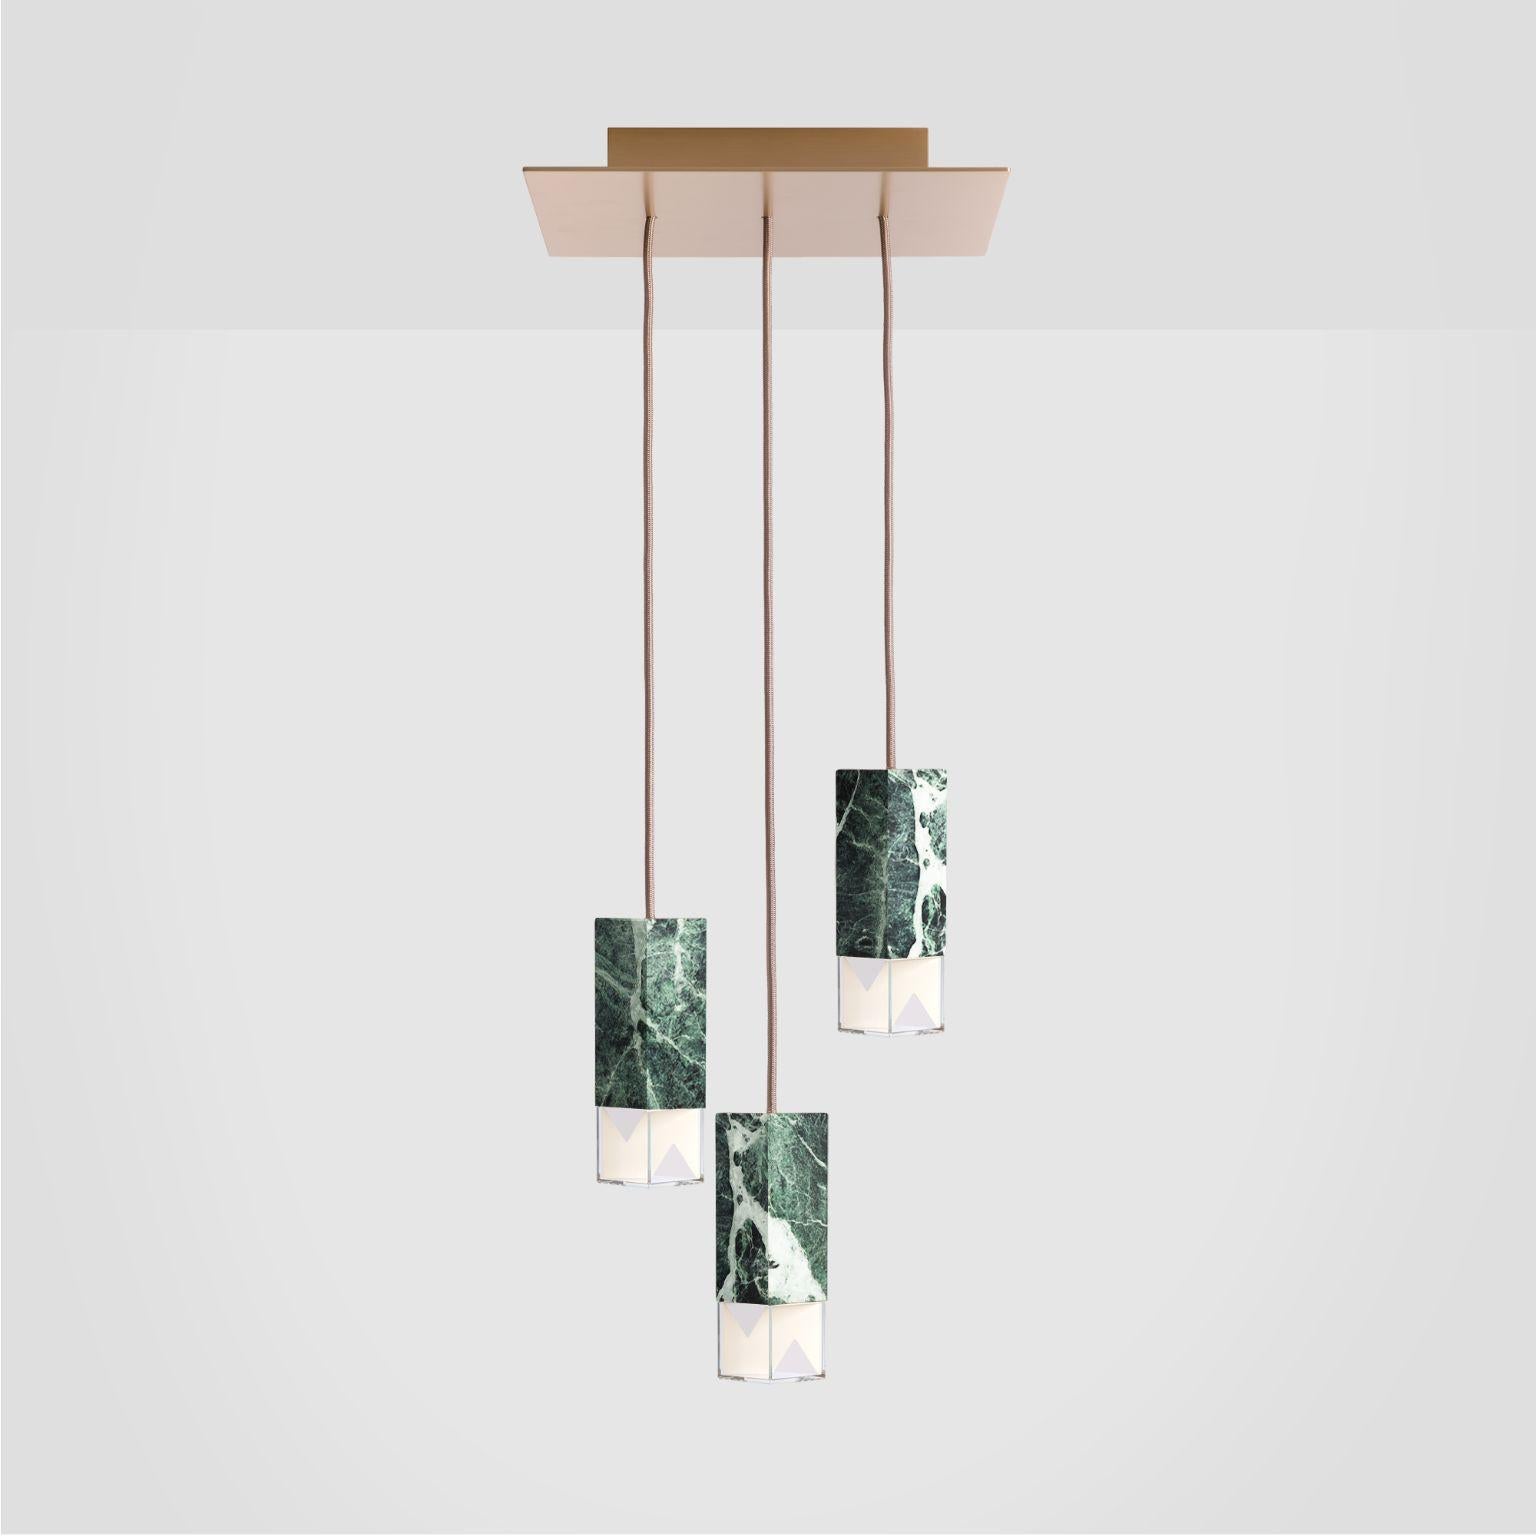 Lamp one green trio chandelier by Formaminima.
Dimensions: W 30 x D 30 x H 68 cm
Materials: 
Body lamps: handcrafted solid Green Alpes marble, translucent, polished finish, Crystal diffusers, Limoges biscuit-finish
porcelain sheets, Ceiling rose